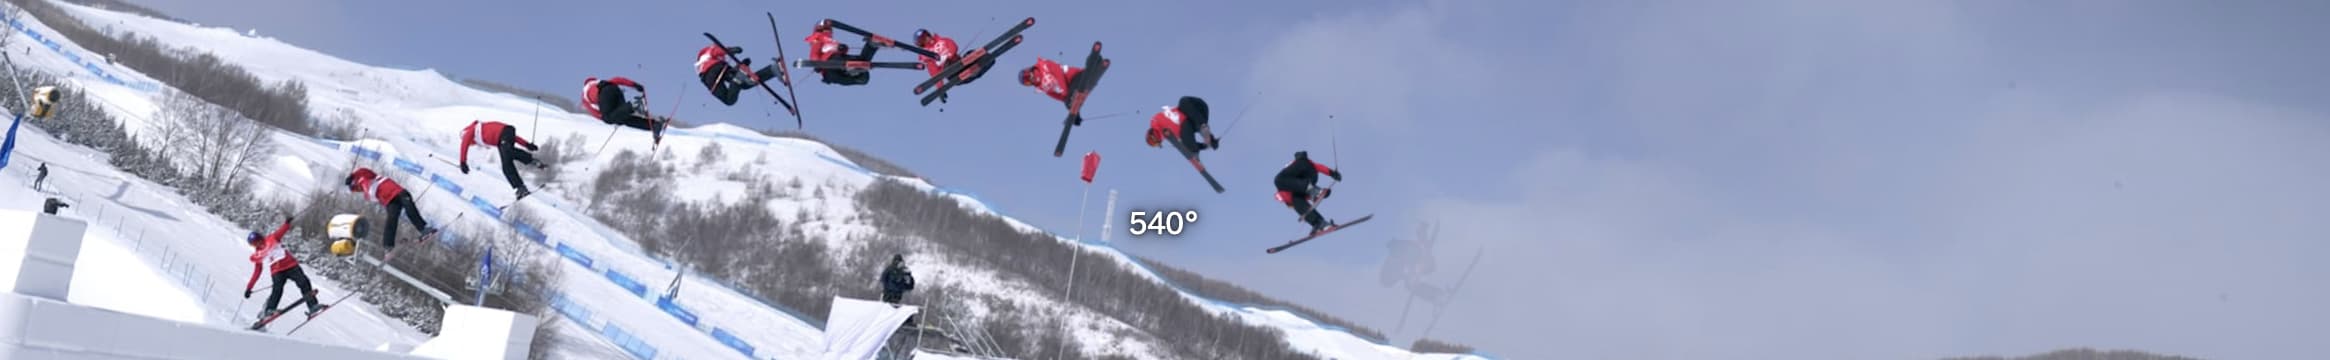 See the Jumps, Twists and Grabs That Brought Eileen Gu Three Olympic Medals